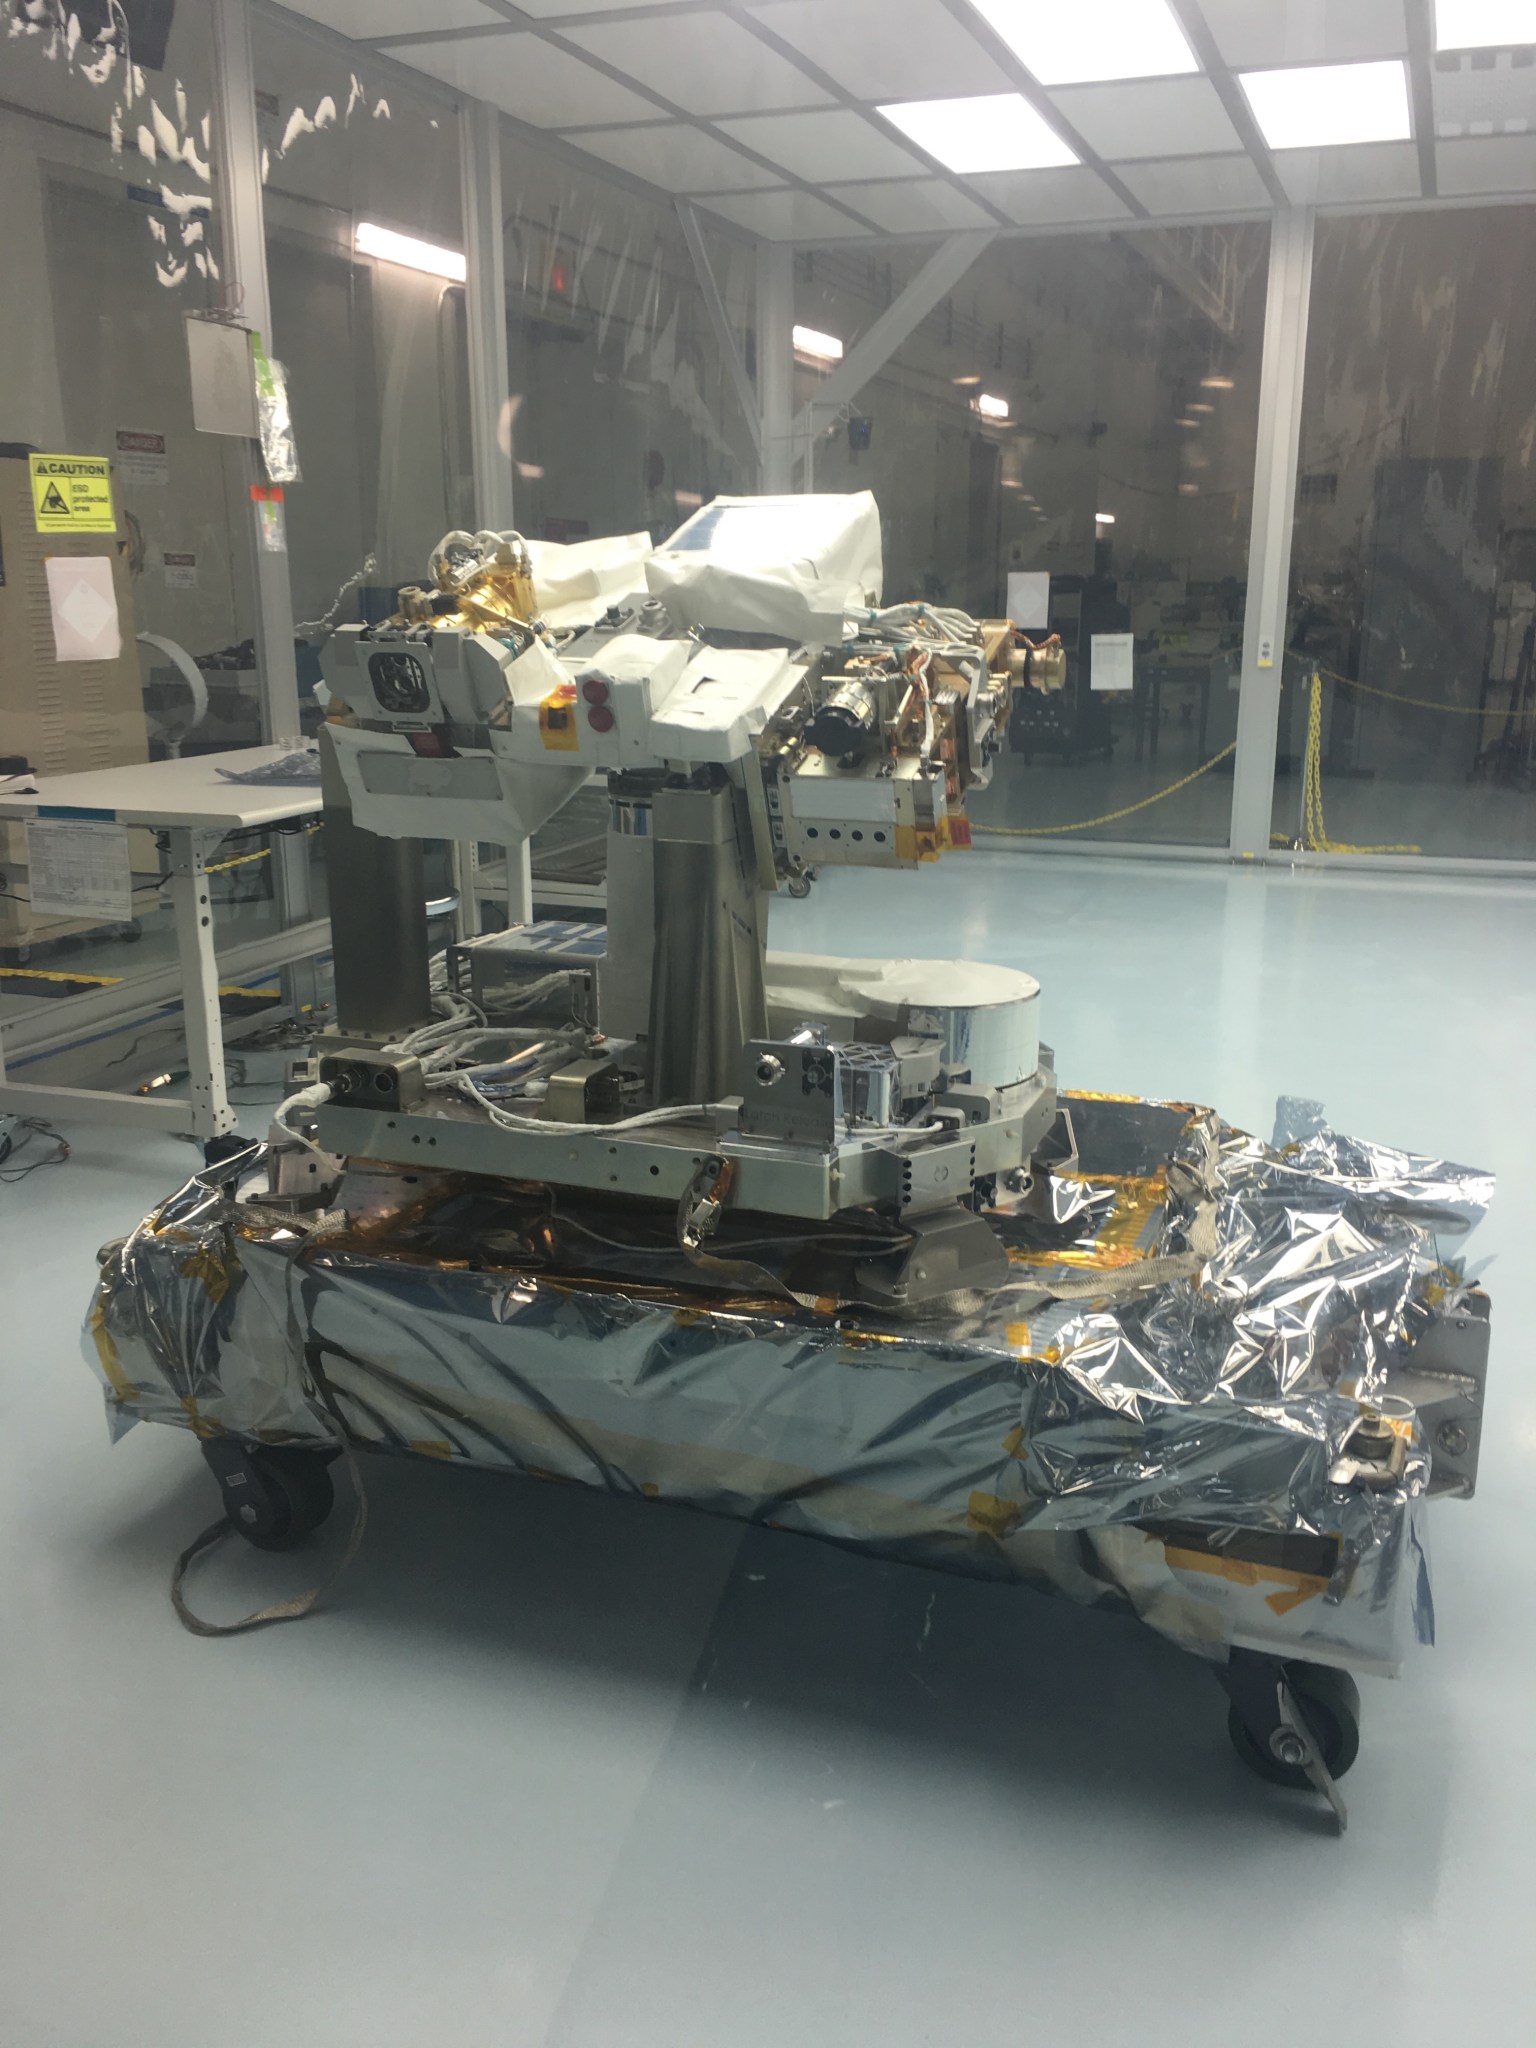 TSIS-1 in the clean room. The spacecraft comprises several meal rectangular prisms on a thin metal neck. Components are wrapped in silver foil with gold tape. It sits on a low, flat wheeled cart.